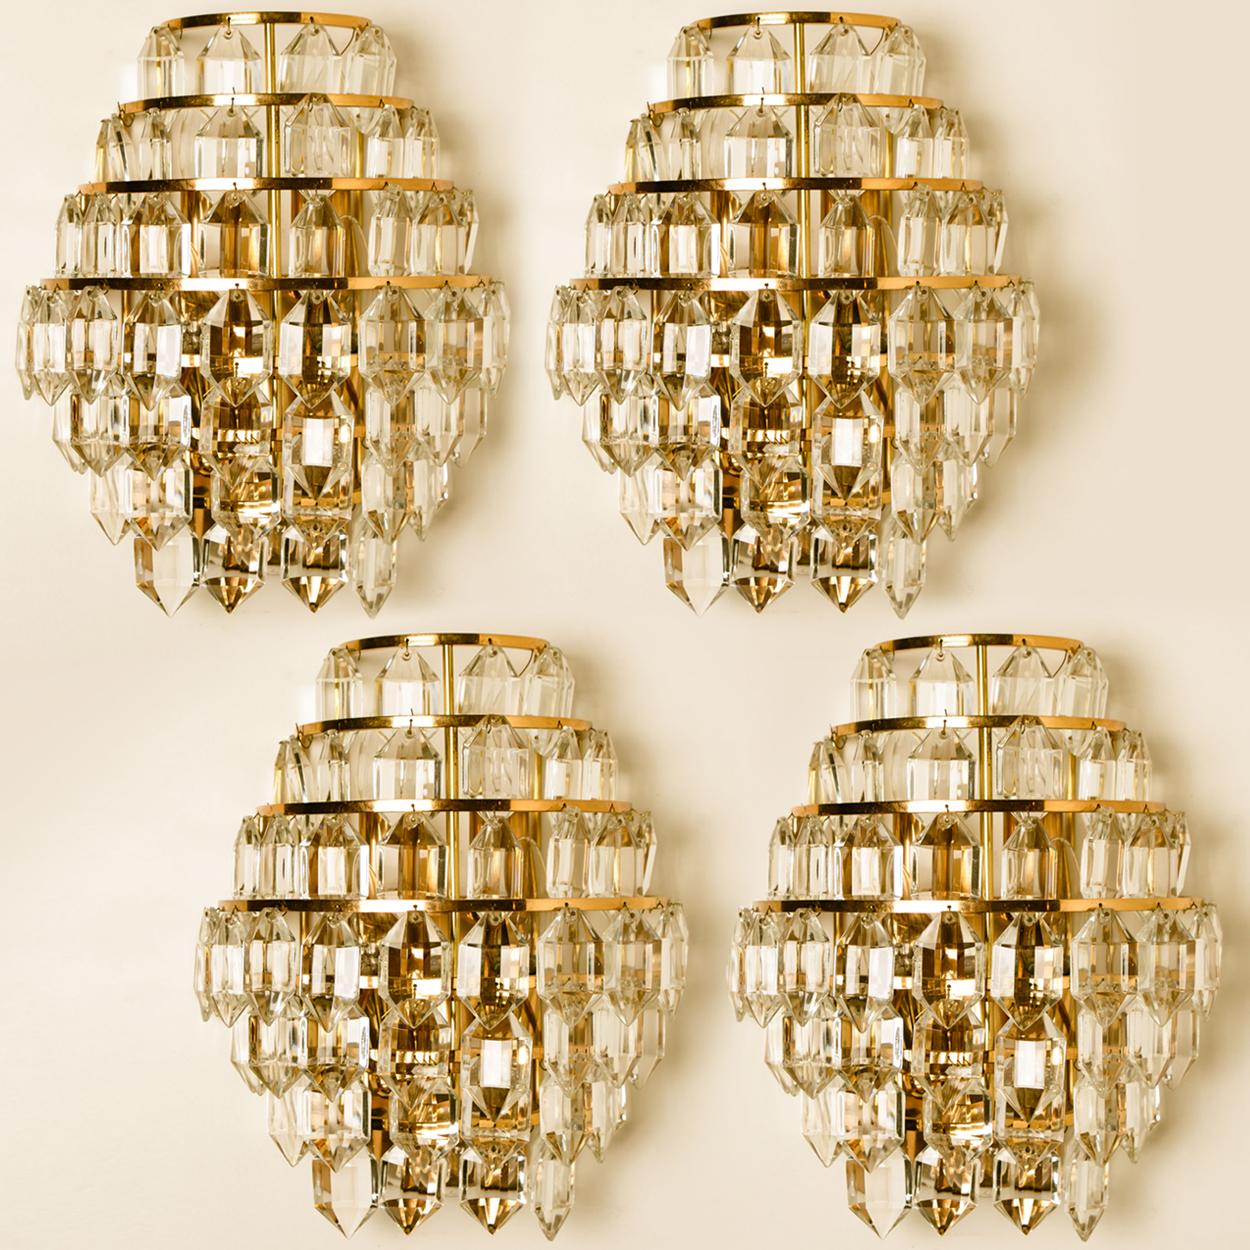 One of the Four Modern Crystal Glass Wall Sconces by Bakalowits, 1960s For Sale 18